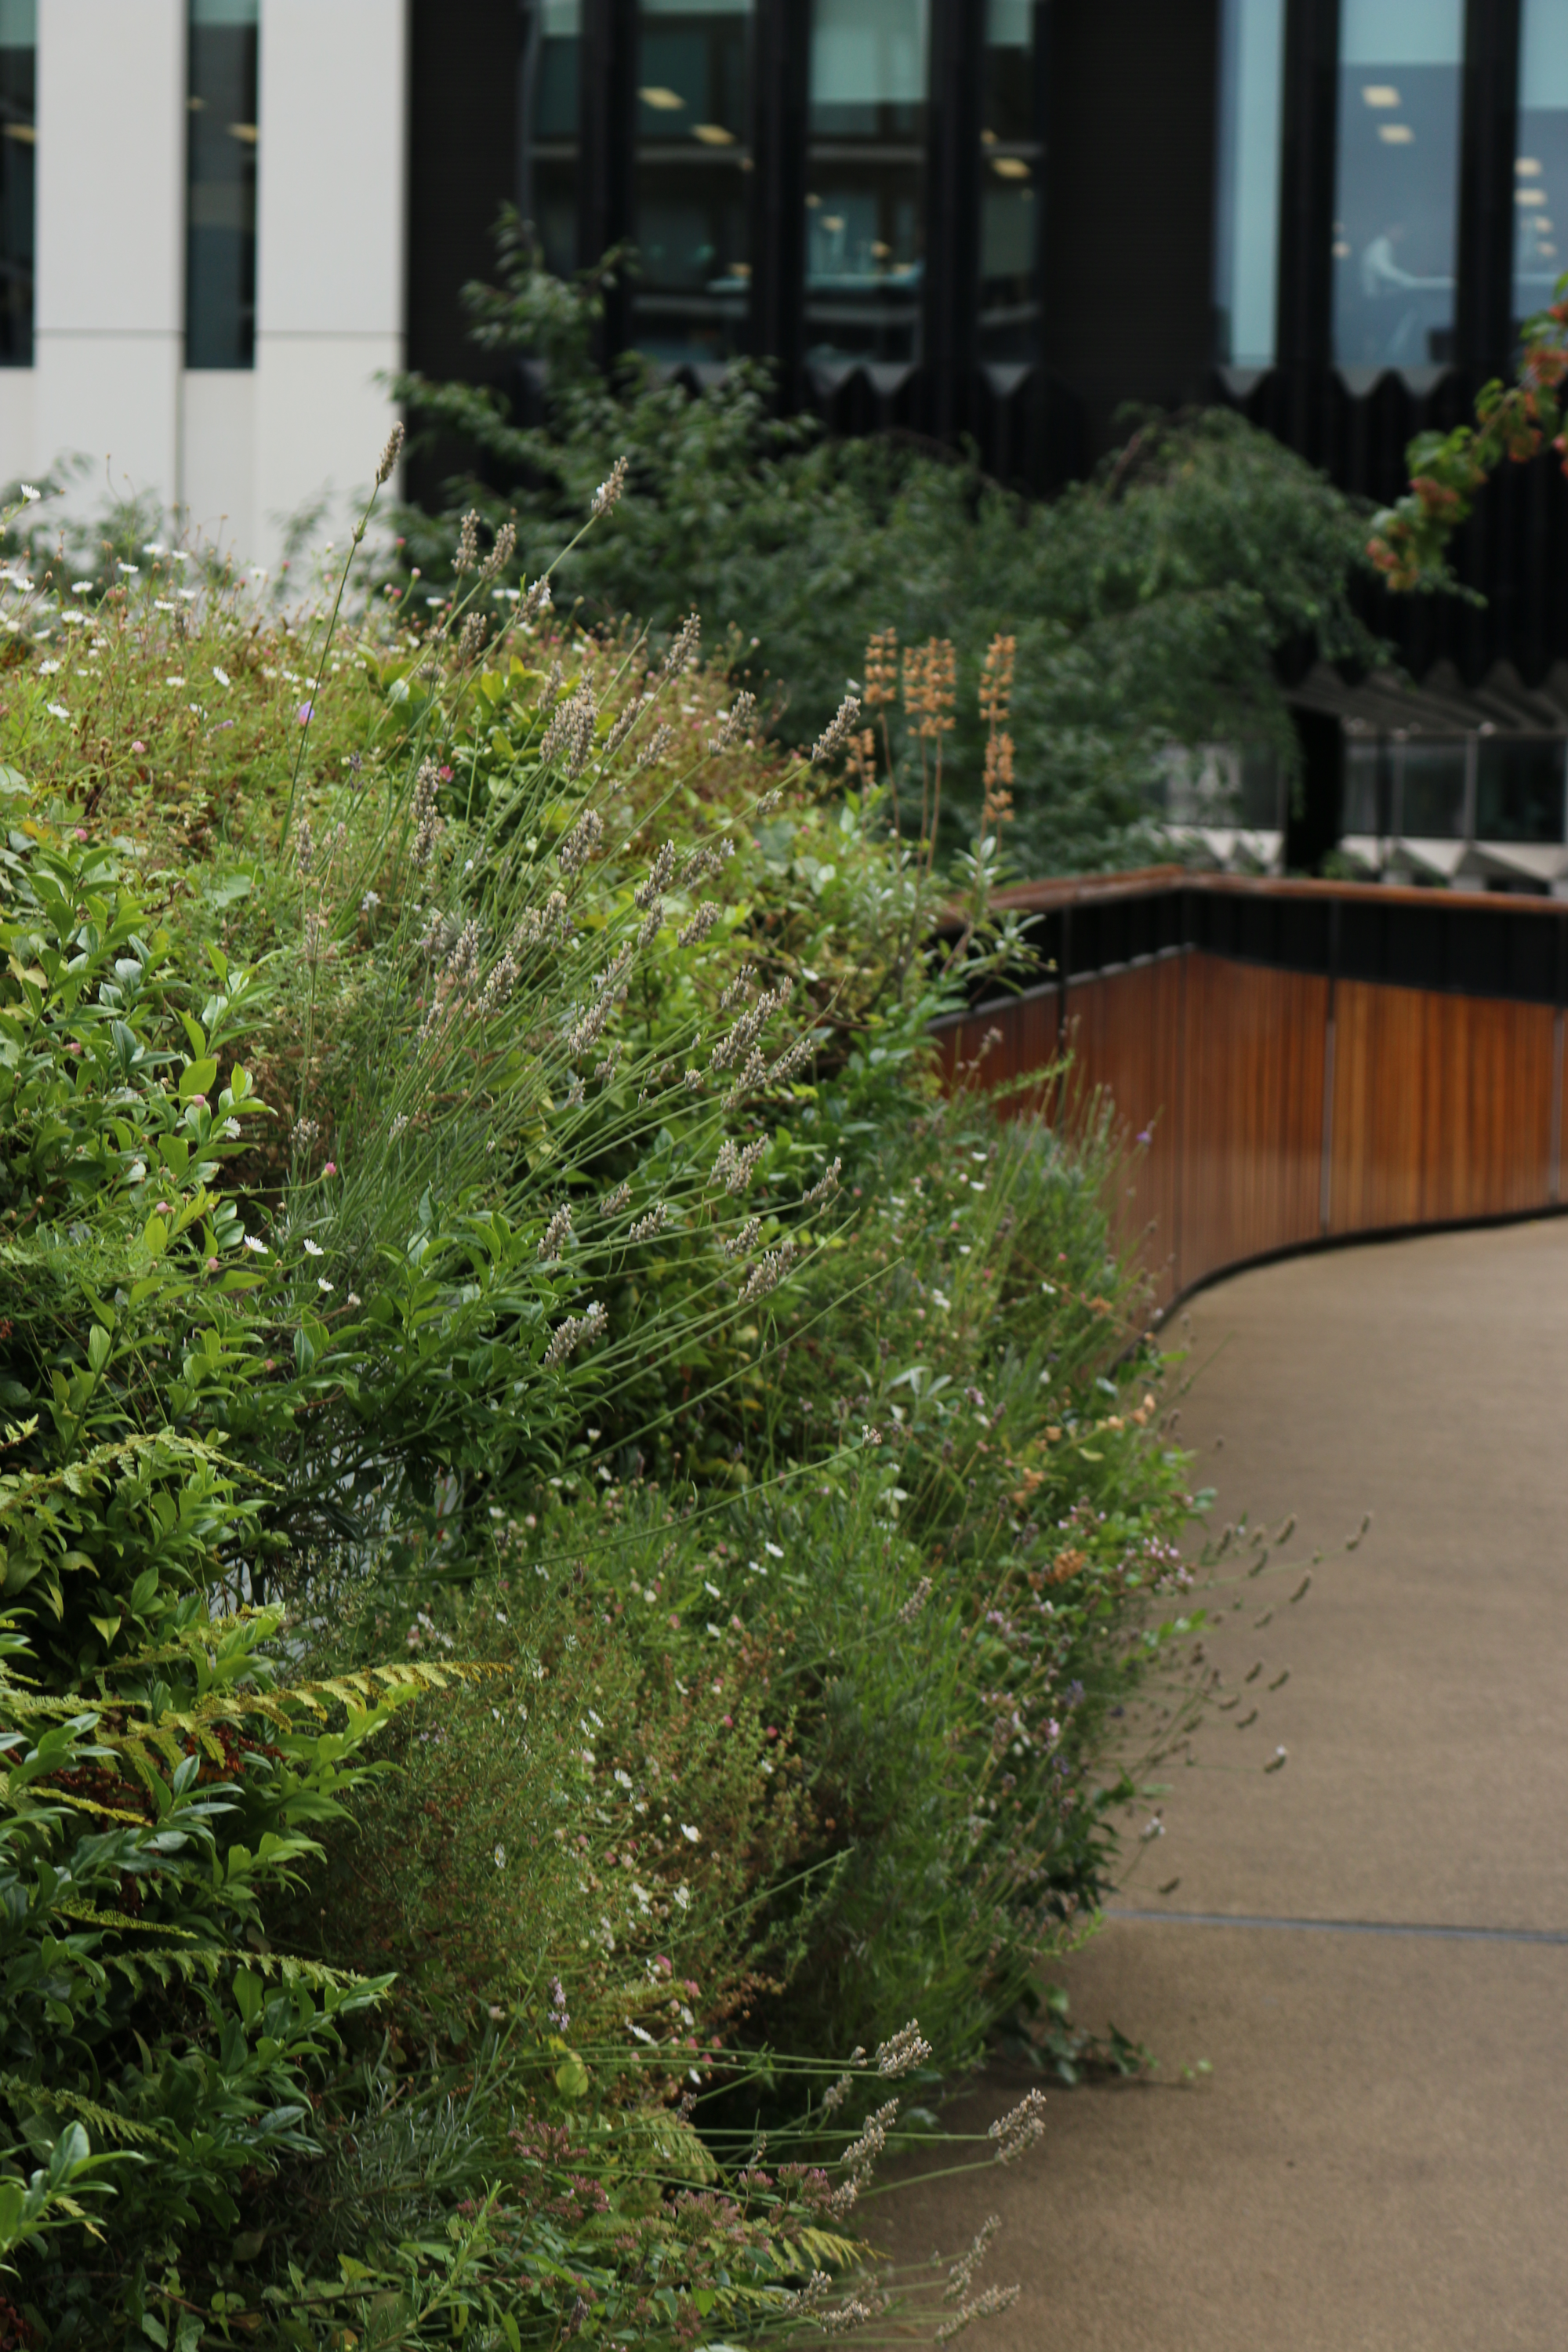 London Wall Place: living wall on a balustrade with lavender and other foliage